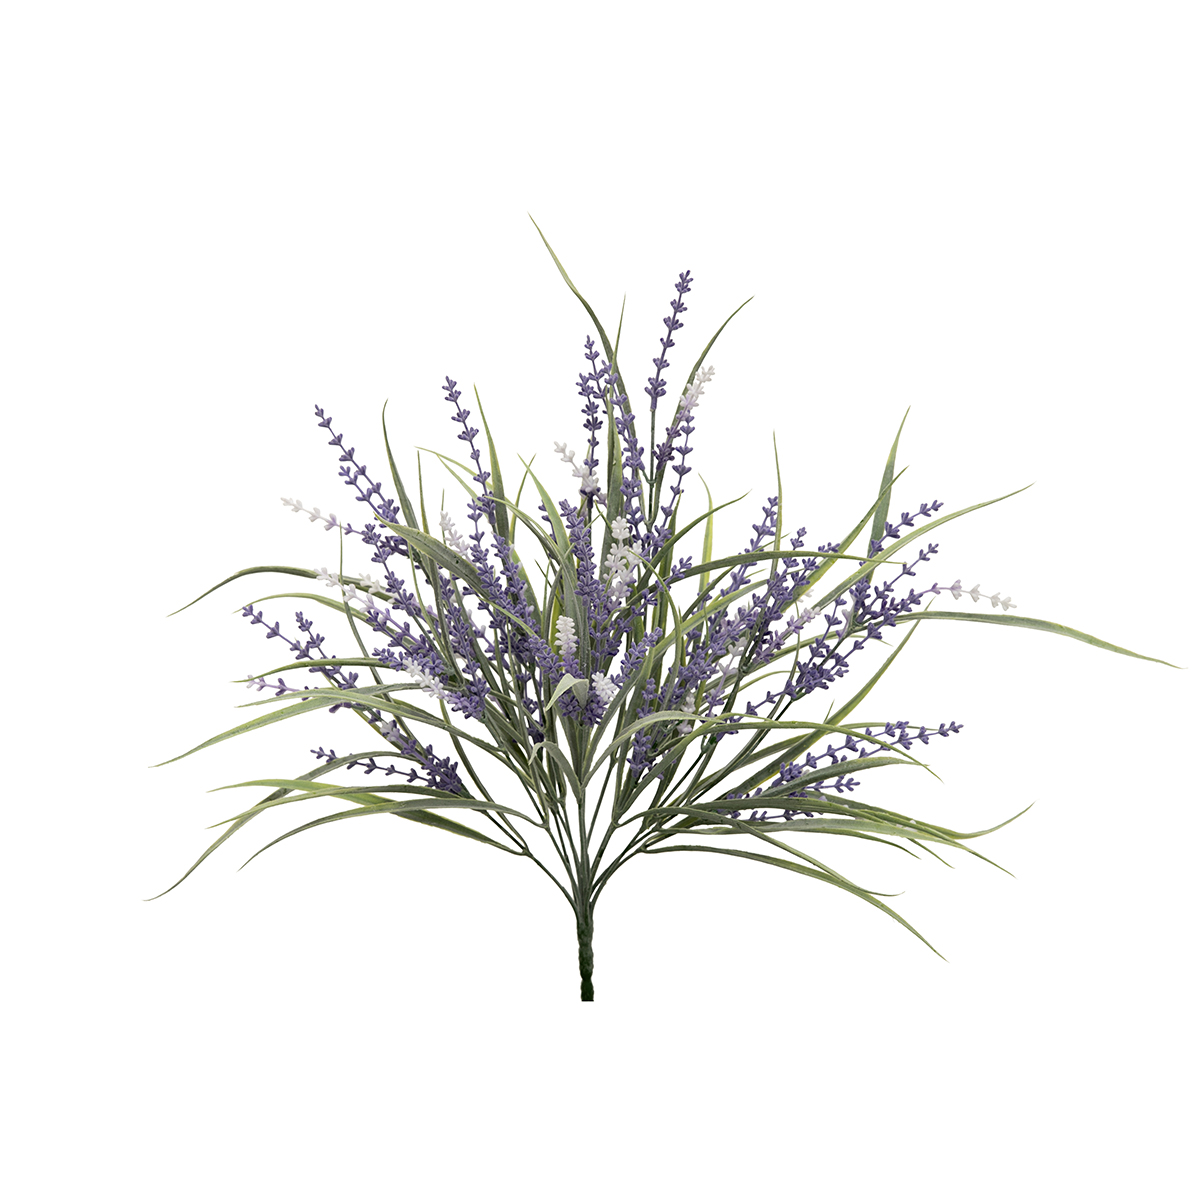 BUSH LAVENDER AND SPIKE GRASS 18IN X 19IN PURPLE